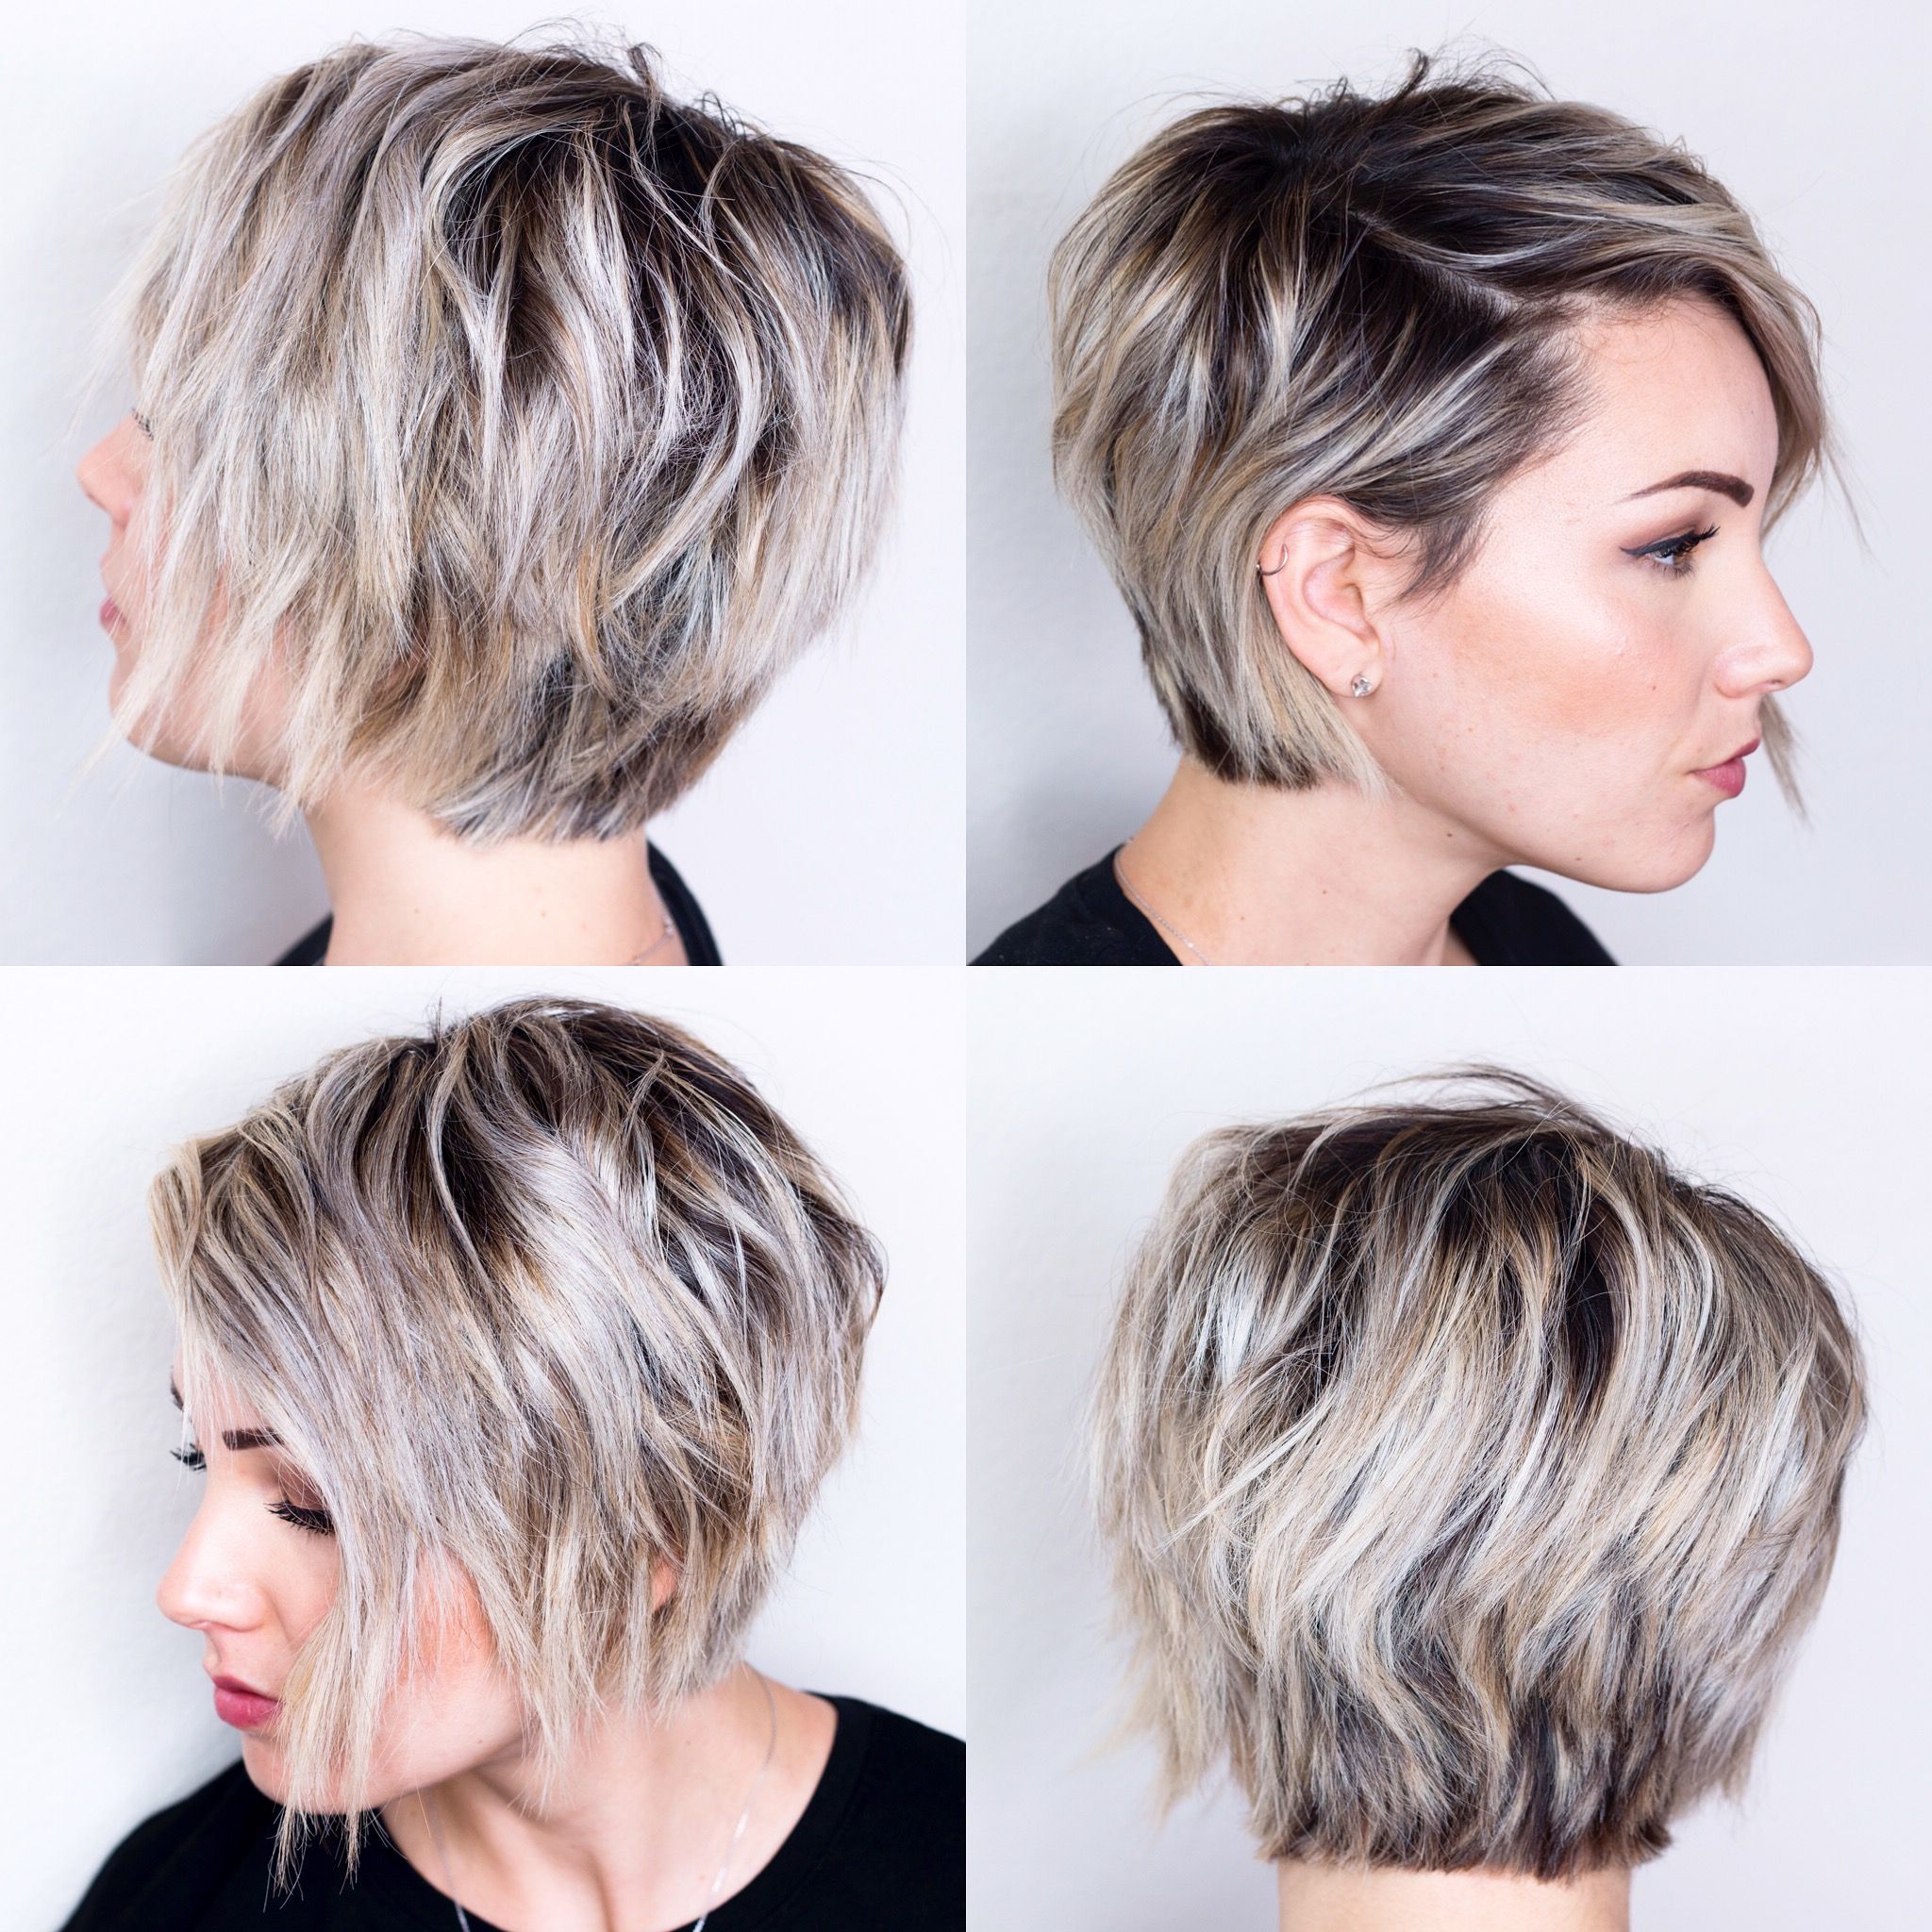 360 View Of Short Hair | H A I R In 2018 | Pinterest | Short Hair With Short Bobs For Oval Faces (View 1 of 25)